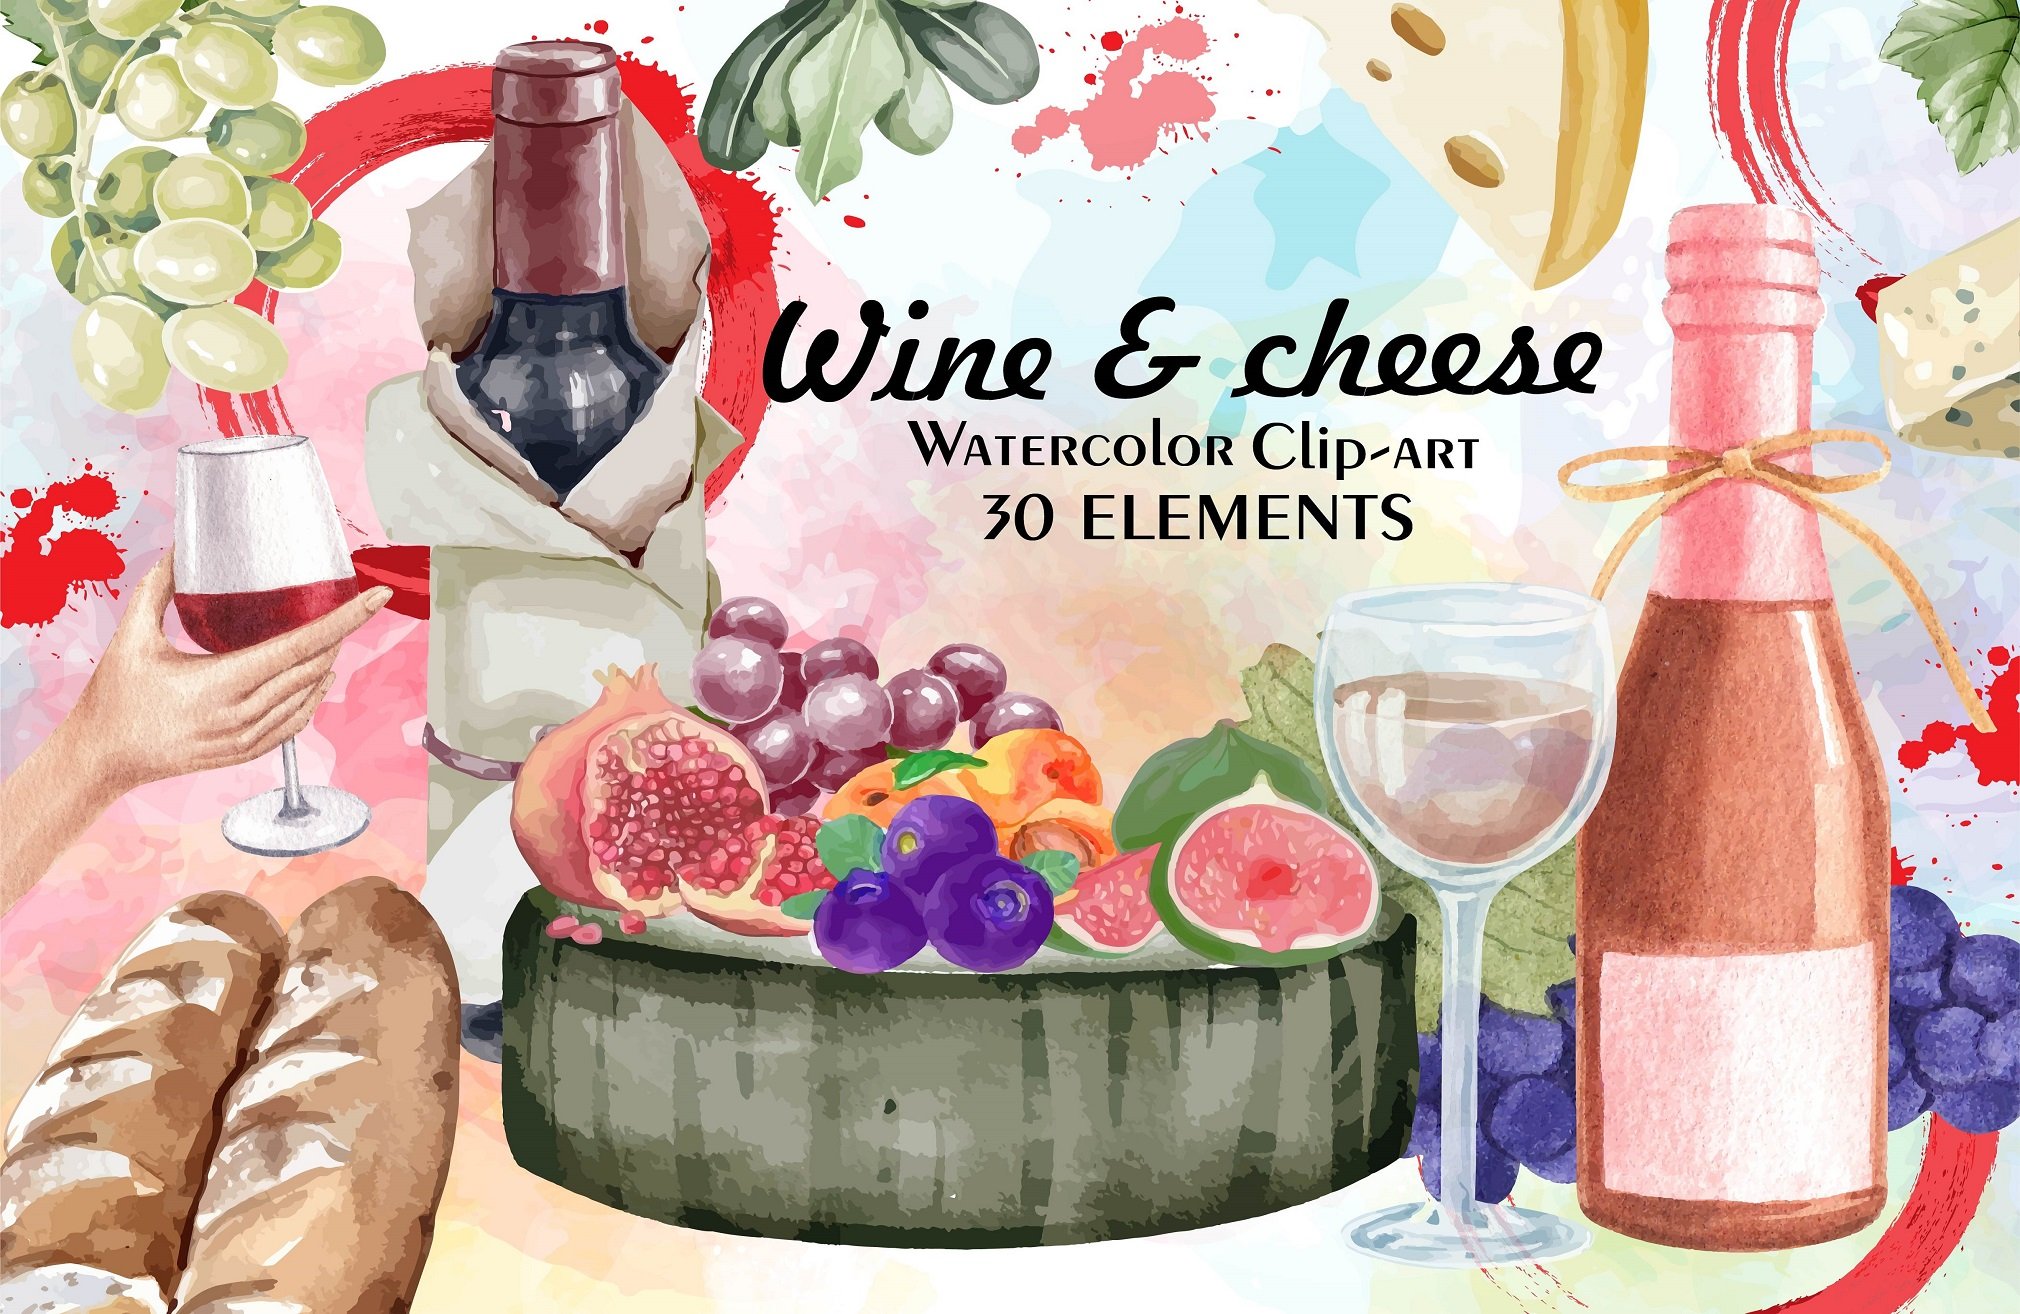 Watercolor Wine & cheese clipart cover image.